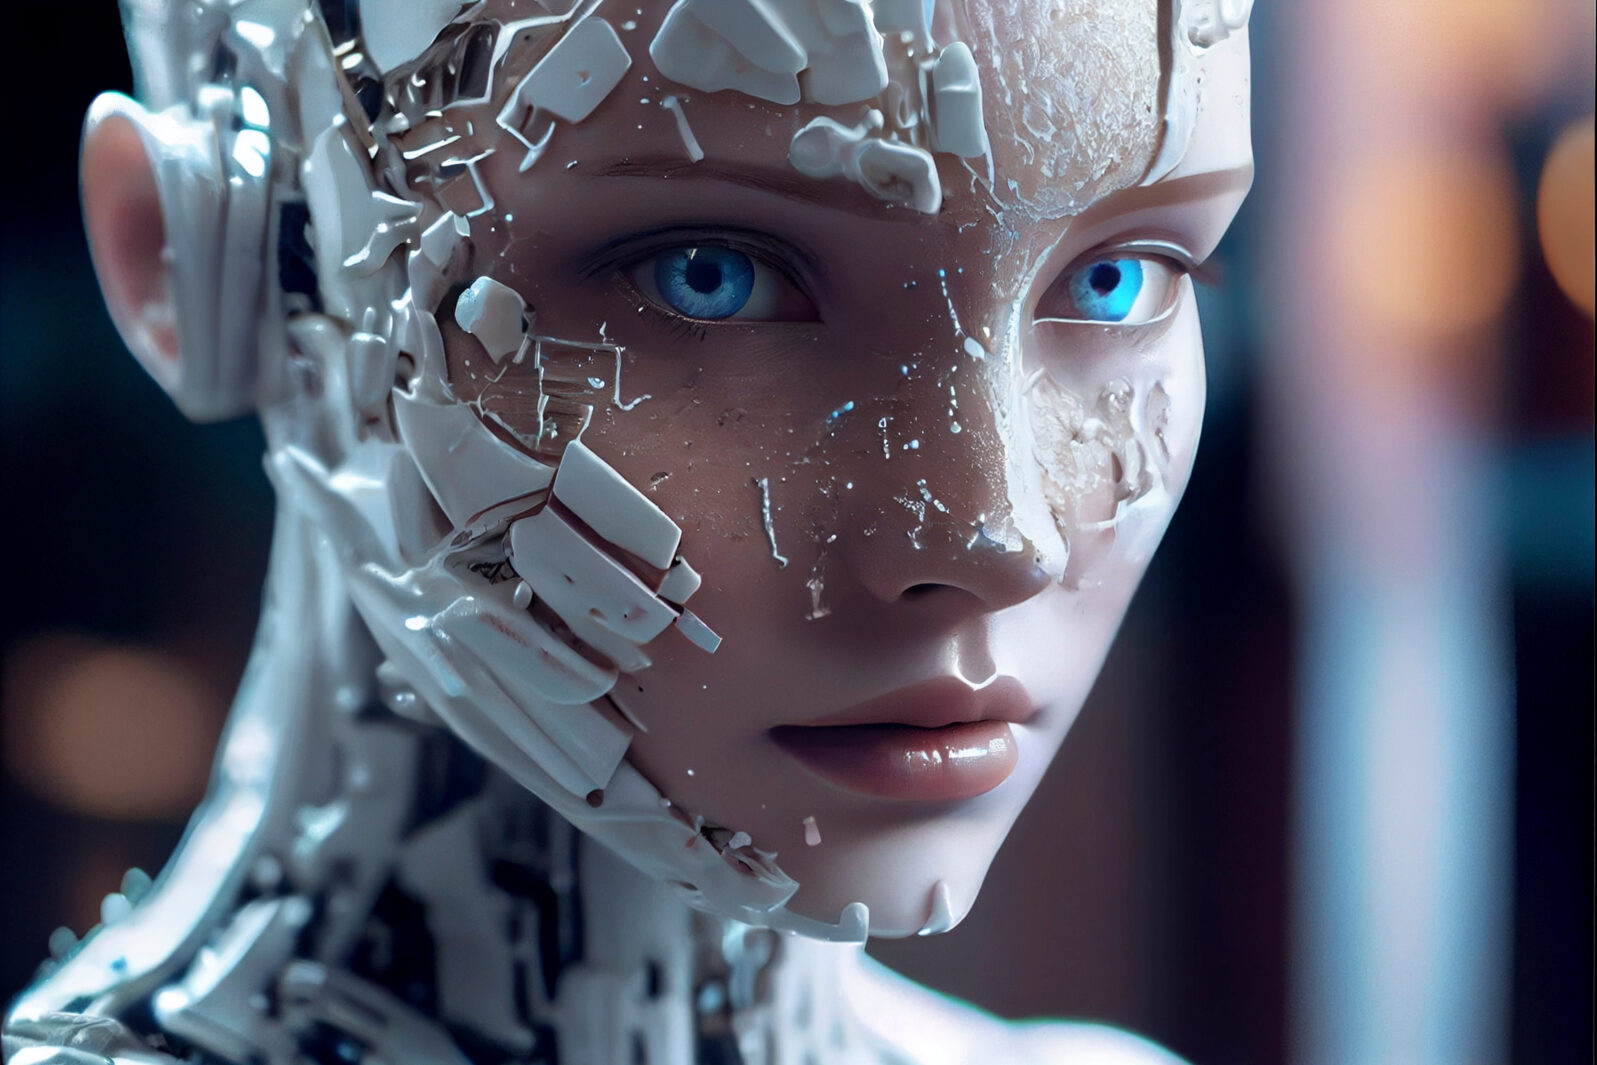 The Flow of Time: A Close-Up Portrait of an Incomplete Humanoid Android Covered in White Porcelain Skin, Blue Eyes, and Glowing Internal Parts.